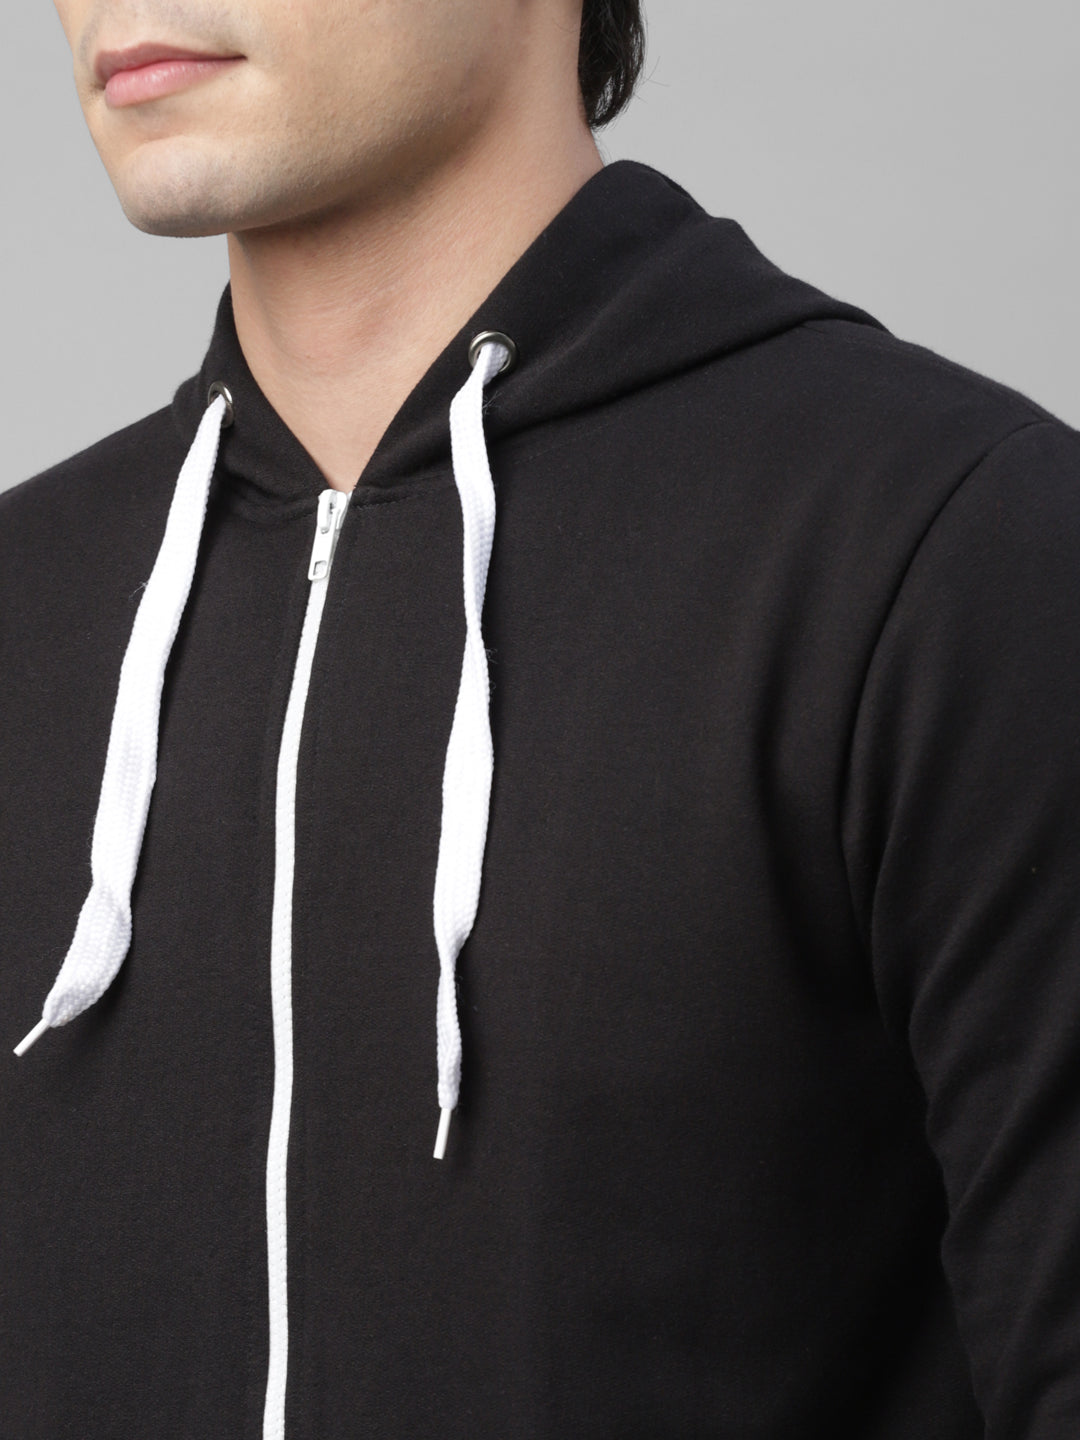 How to Add a Zipper to a Hoodie